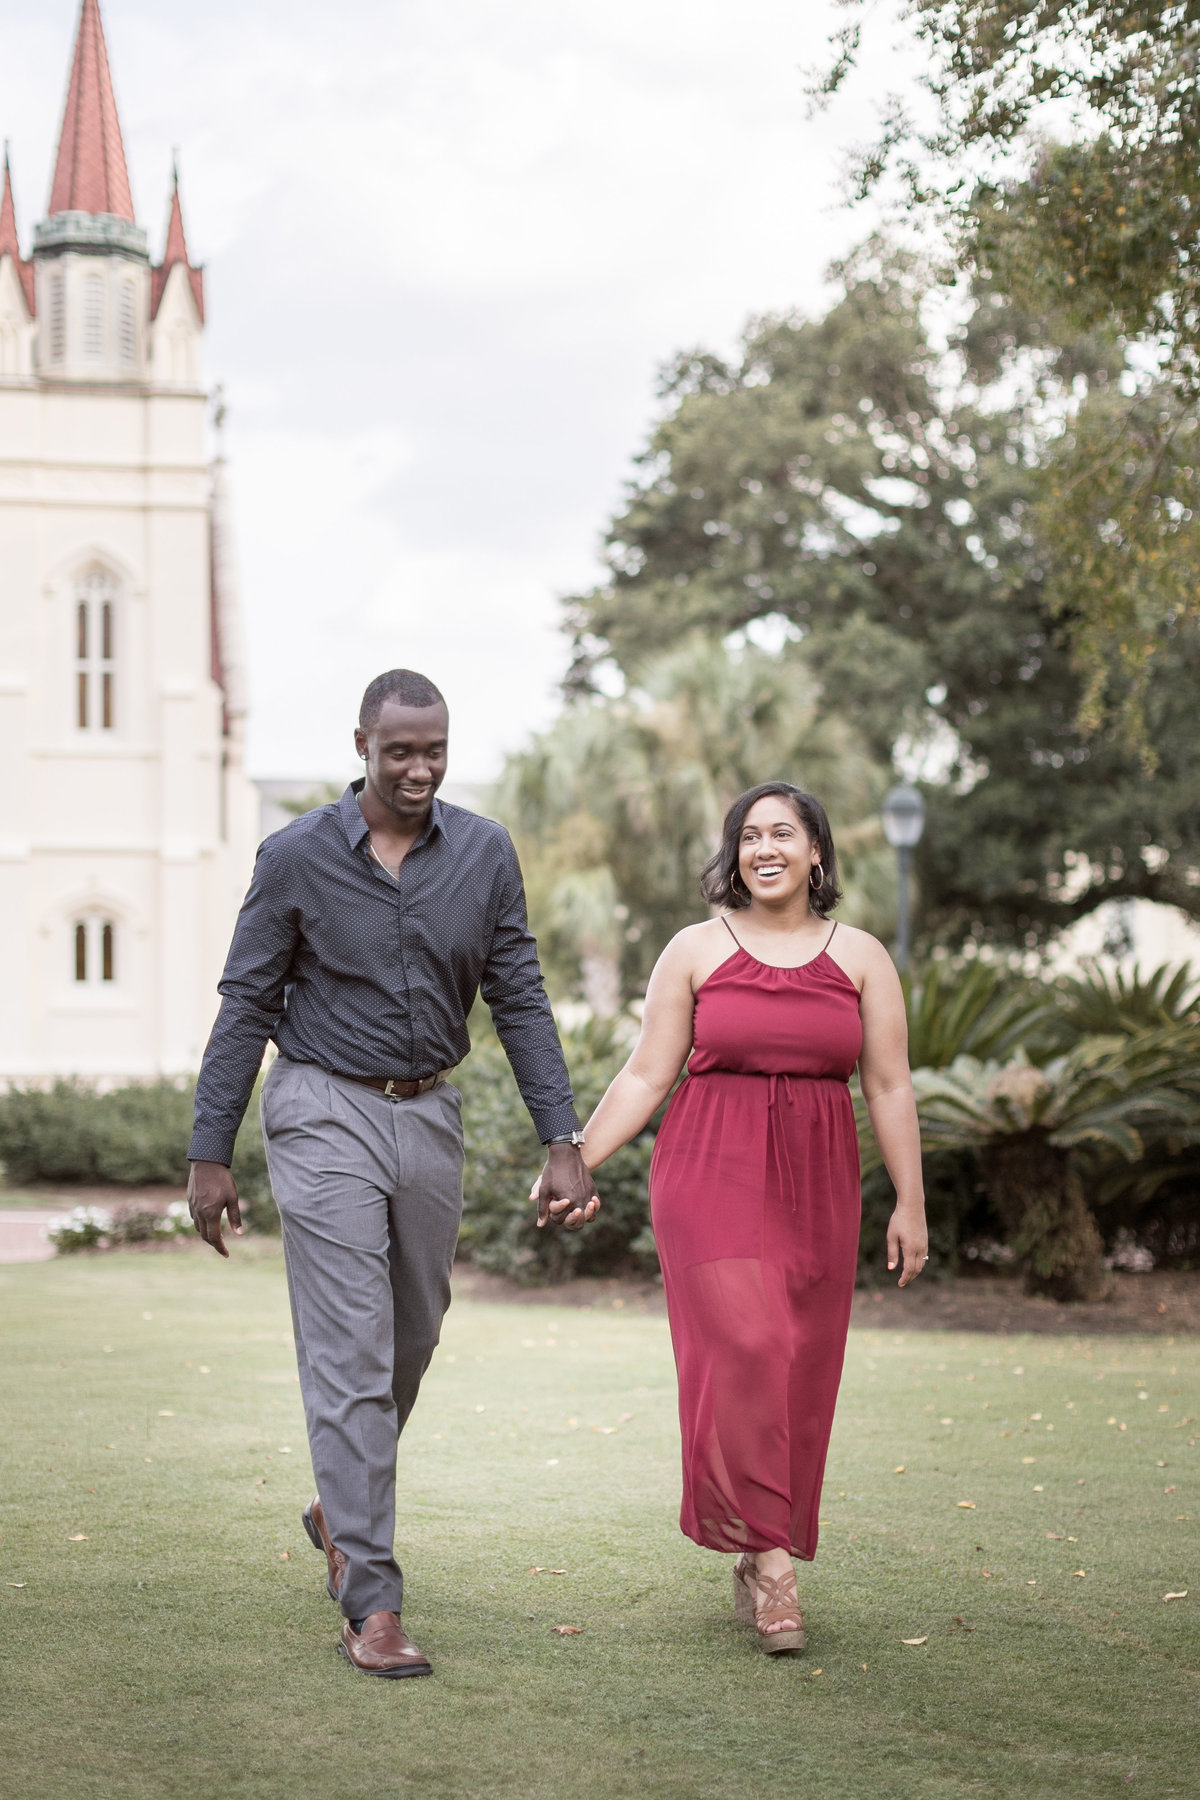 The newly engaged couple takes a stroll on the lawn of St. Joseph's Chapel at Springhill College in Mobile, Alabama.